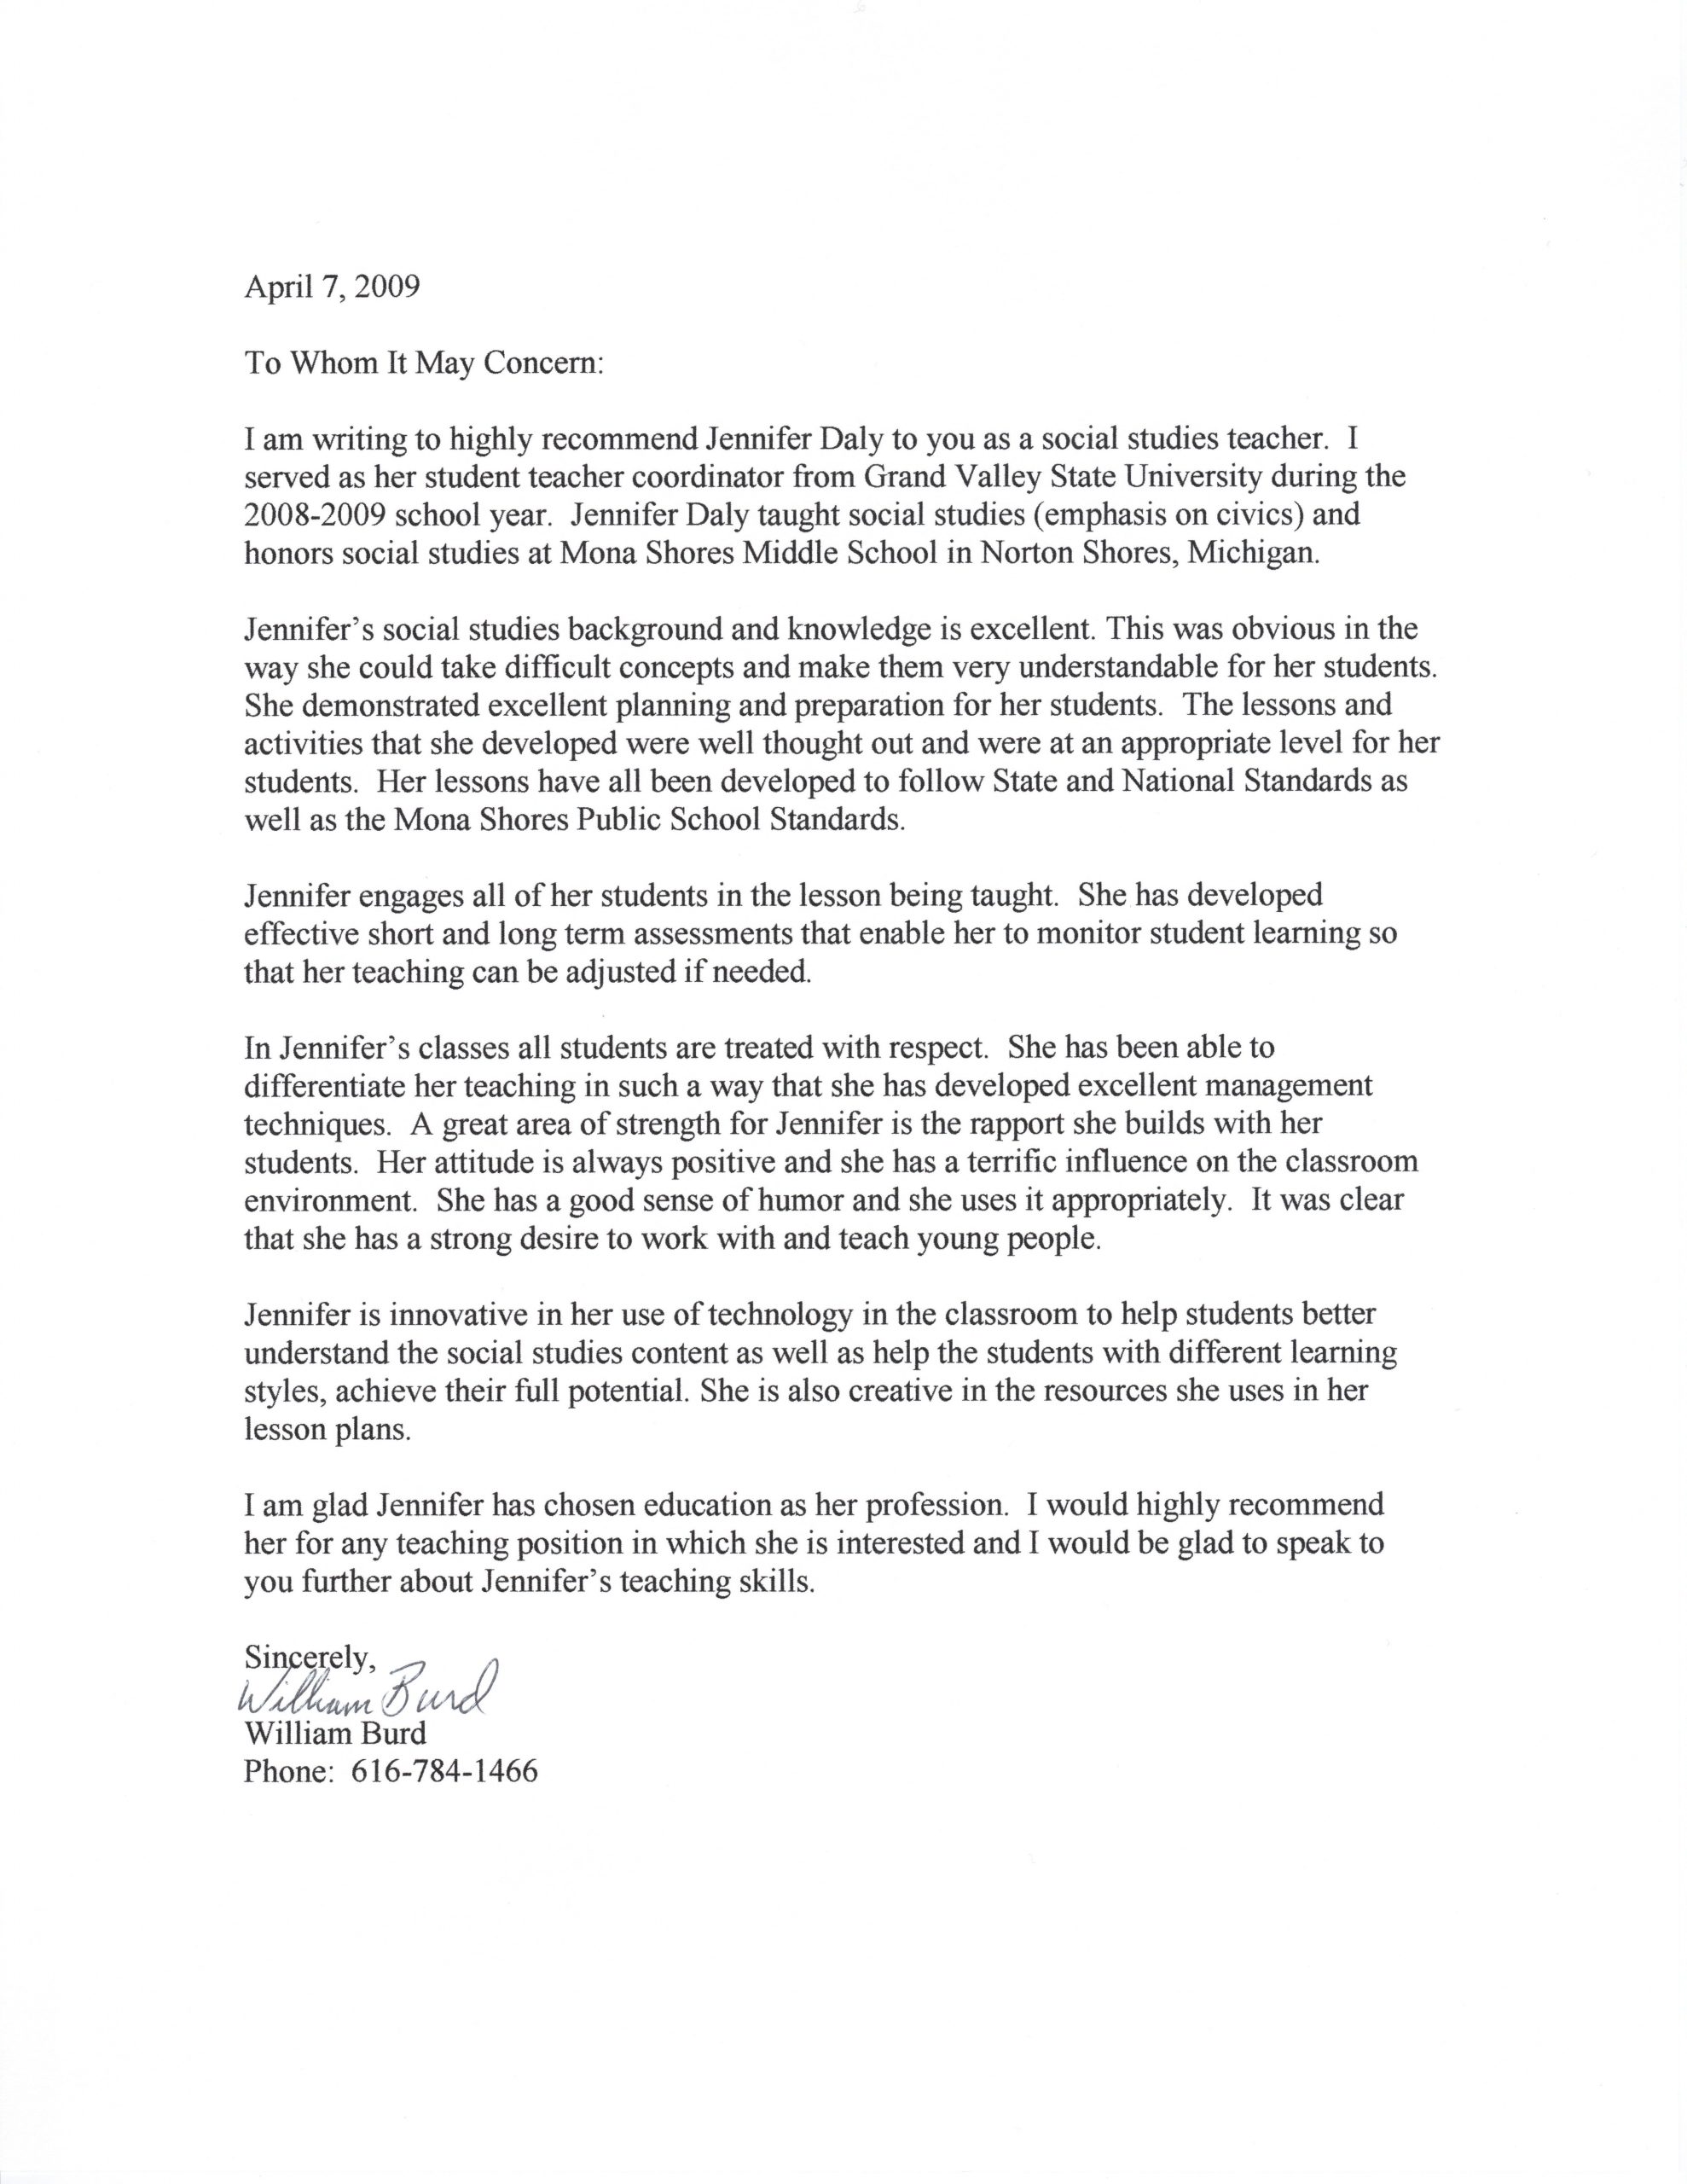 Sample Teacher Letter Of Recommendation For College Akali with dimensions 5100 X 6600